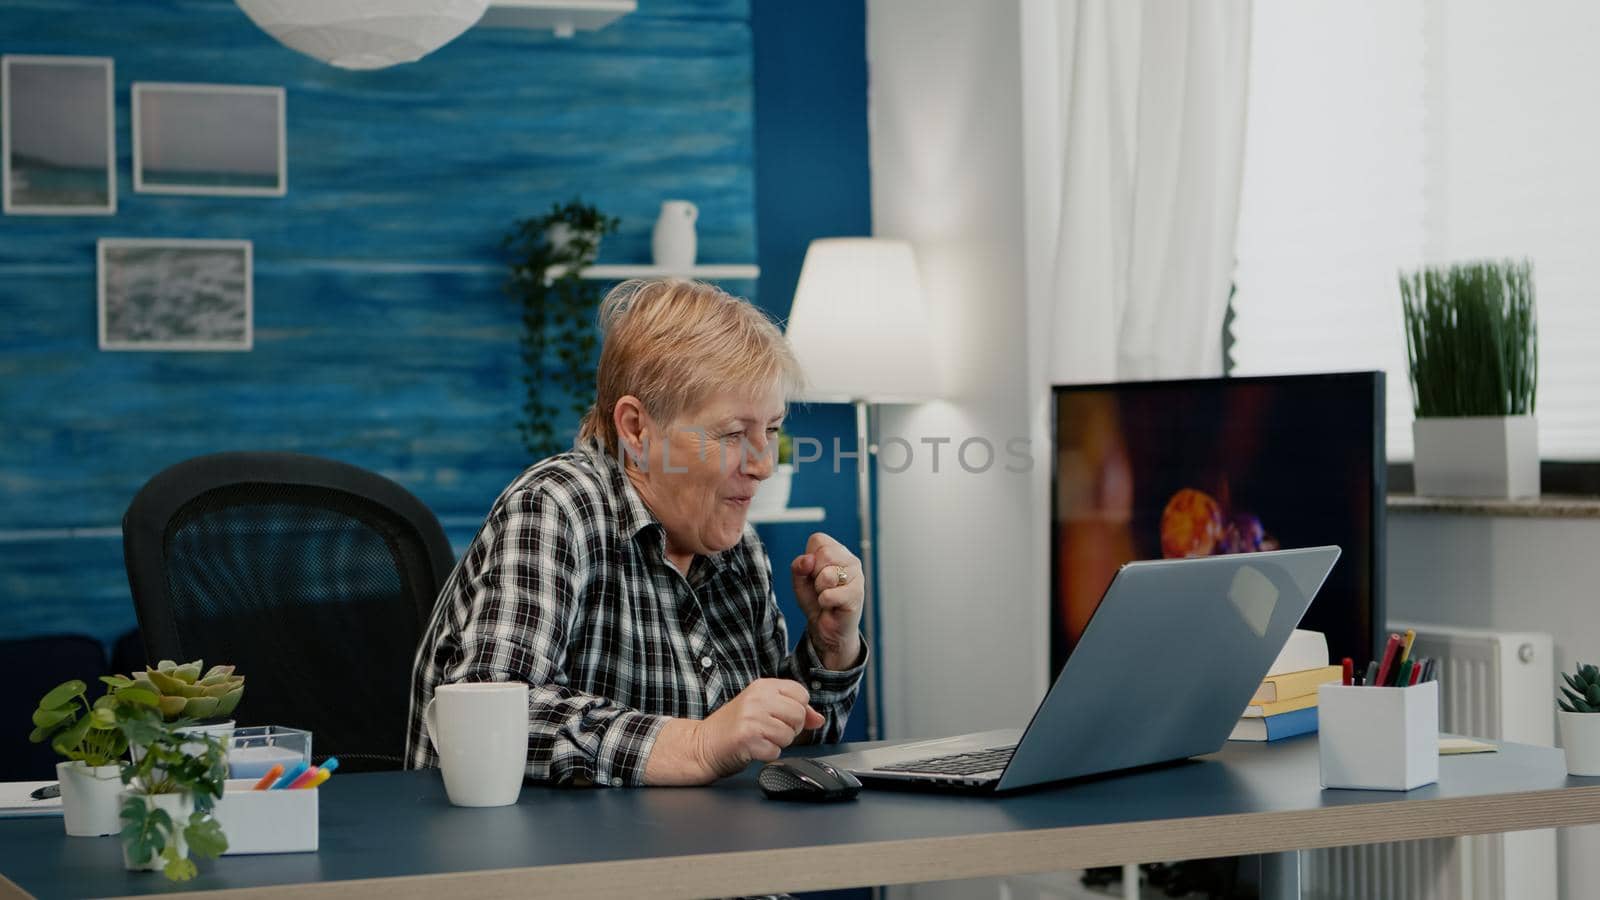 Old woman receving good news on laptop working from home by DCStudio